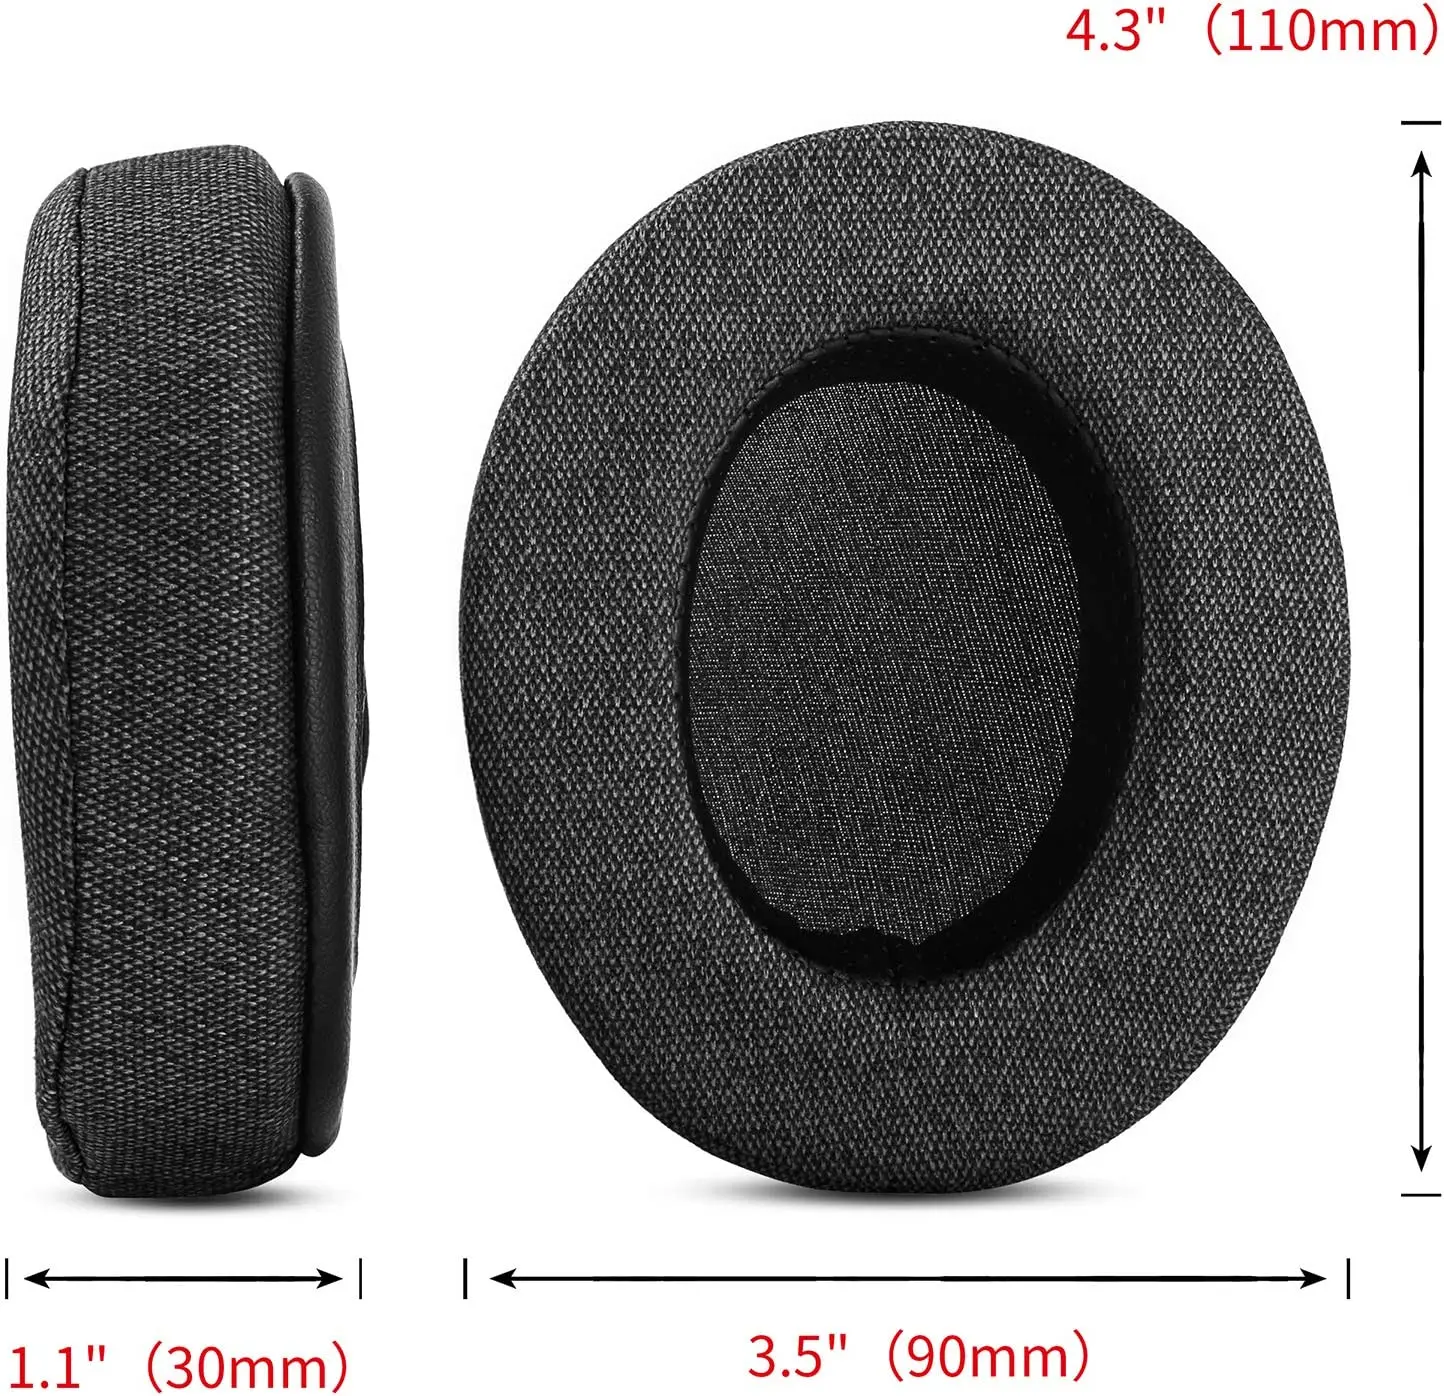 

Replacement Ear Pads Cups Cushion Compatible with Corsair HS50 HS60 HS70 Pro Gaming Headset Headphones Earmuffs